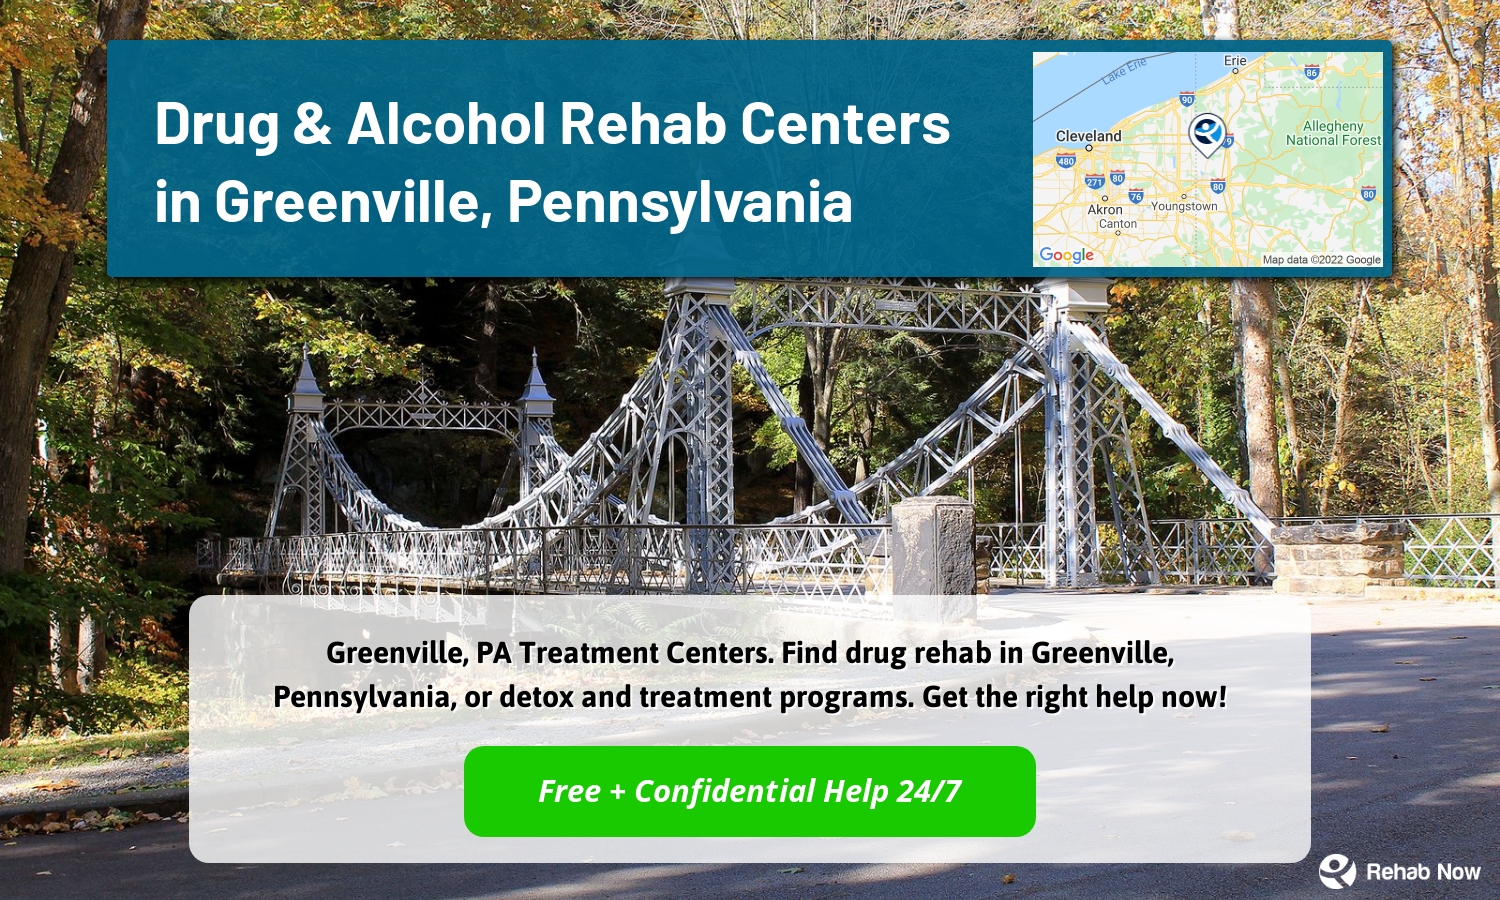 Greenville, PA Treatment Centers. Find drug rehab in Greenville, Pennsylvania, or detox and treatment programs. Get the right help now!